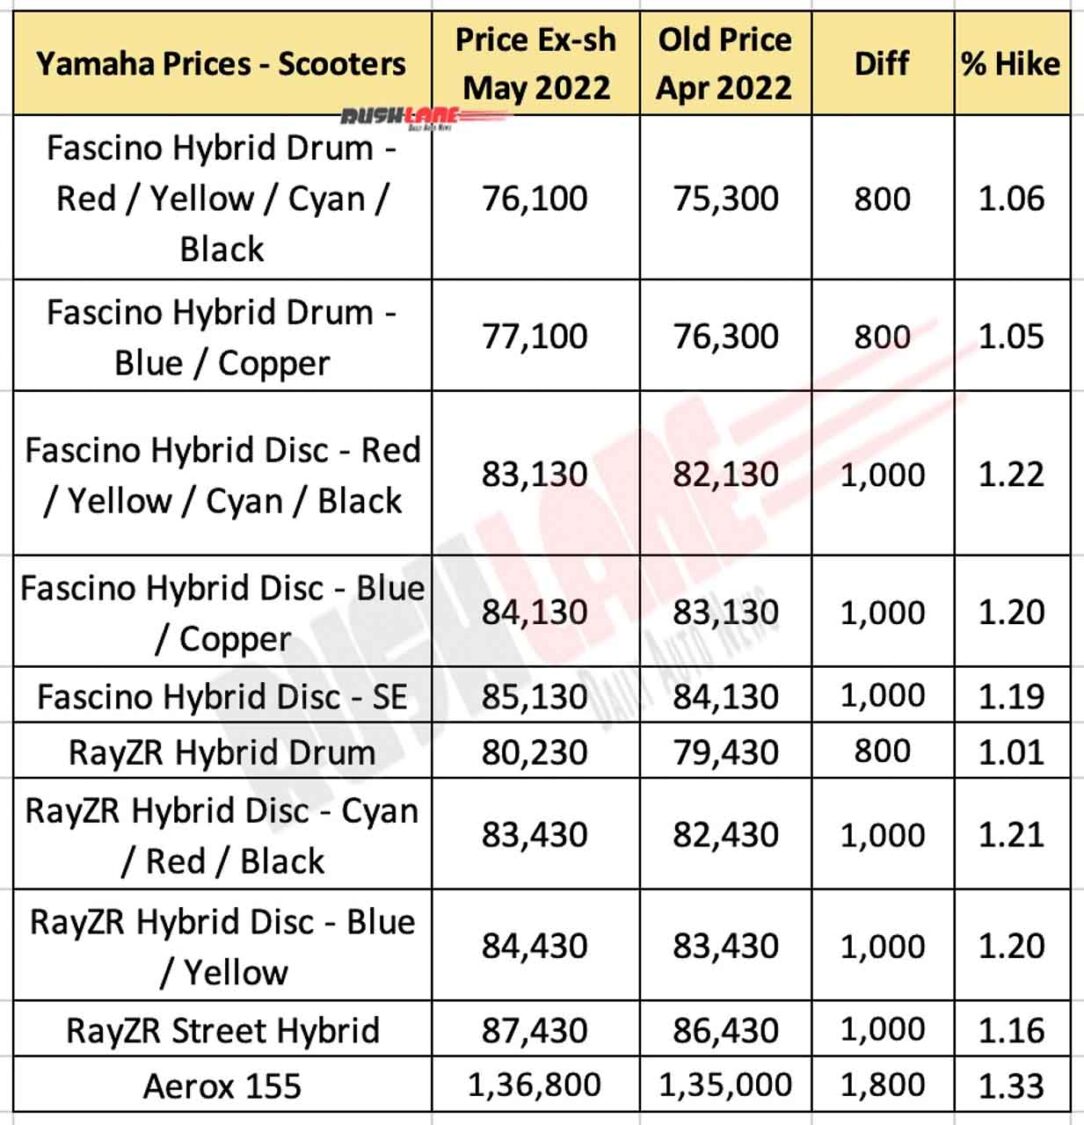 Yamaha Scooter Prices May 2022